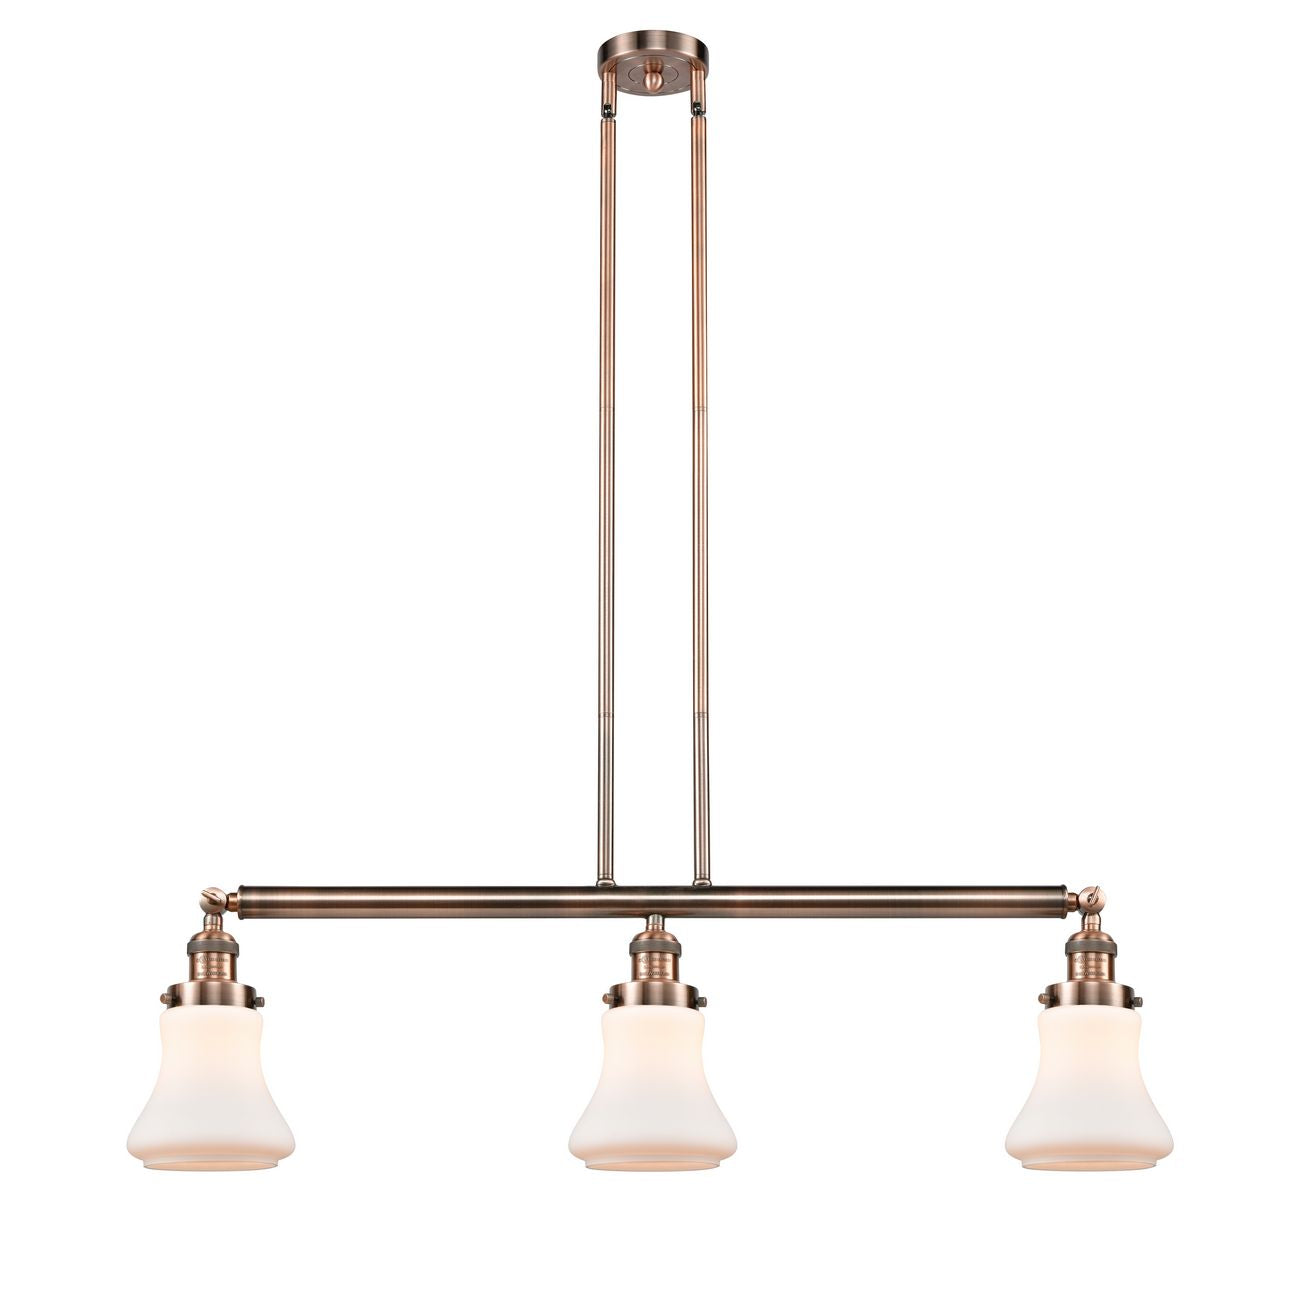 213-AC-G191 3-Light 38.75" Antique Copper Island Light - Matte White Bellmont Glass - LED Bulb - Dimmensions: 38.75 x 6.25 x 11<br>Minimum Height : 20.5<br>Maximum Height : 44.5 - Sloped Ceiling Compatible: Yes